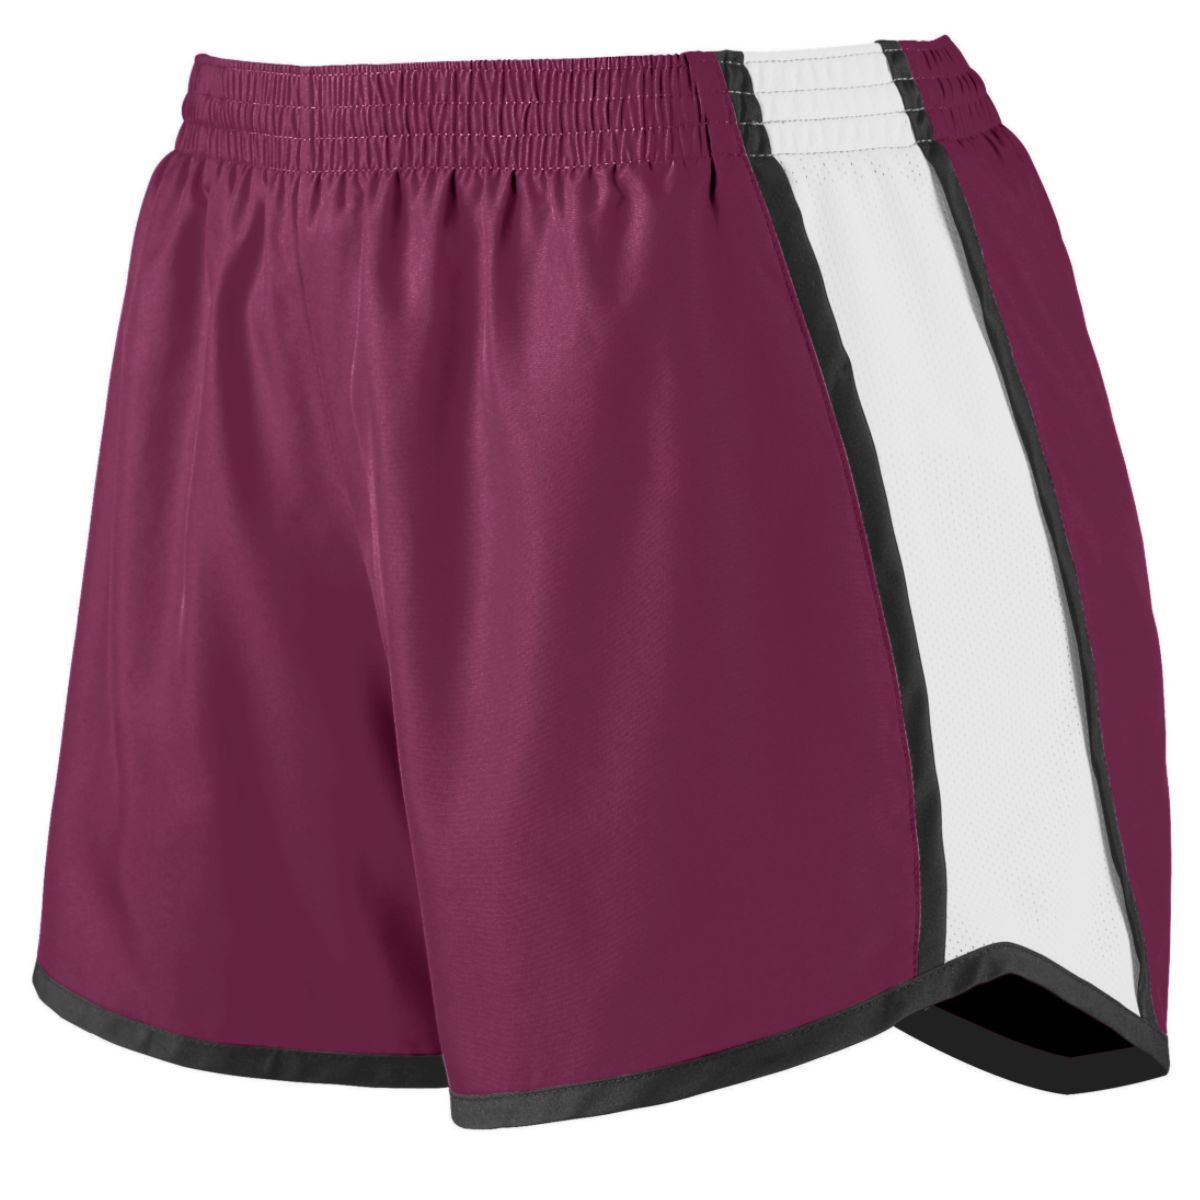 Augusta Sportswear Ladies Pulse Shorts in Maroon/White/Black  -Part of the Ladies, Ladies-Shorts, Augusta-Products, Volleyball product lines at KanaleyCreations.com